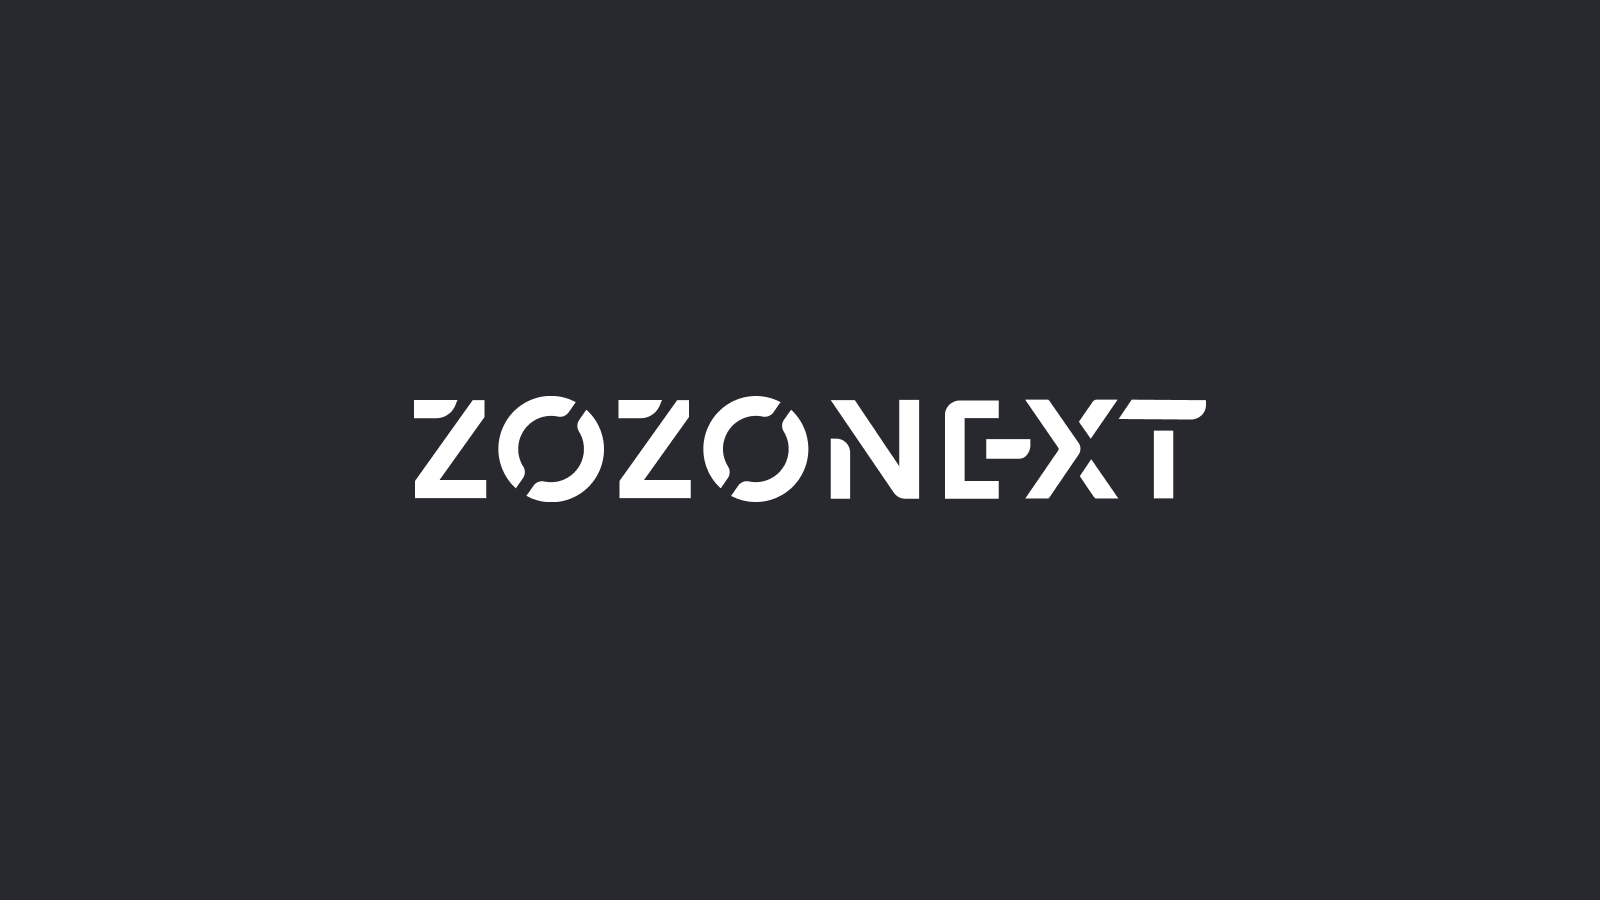 Launched ZOZO NEXT, Inc. a new company that uses cutting-edge technology to create new value